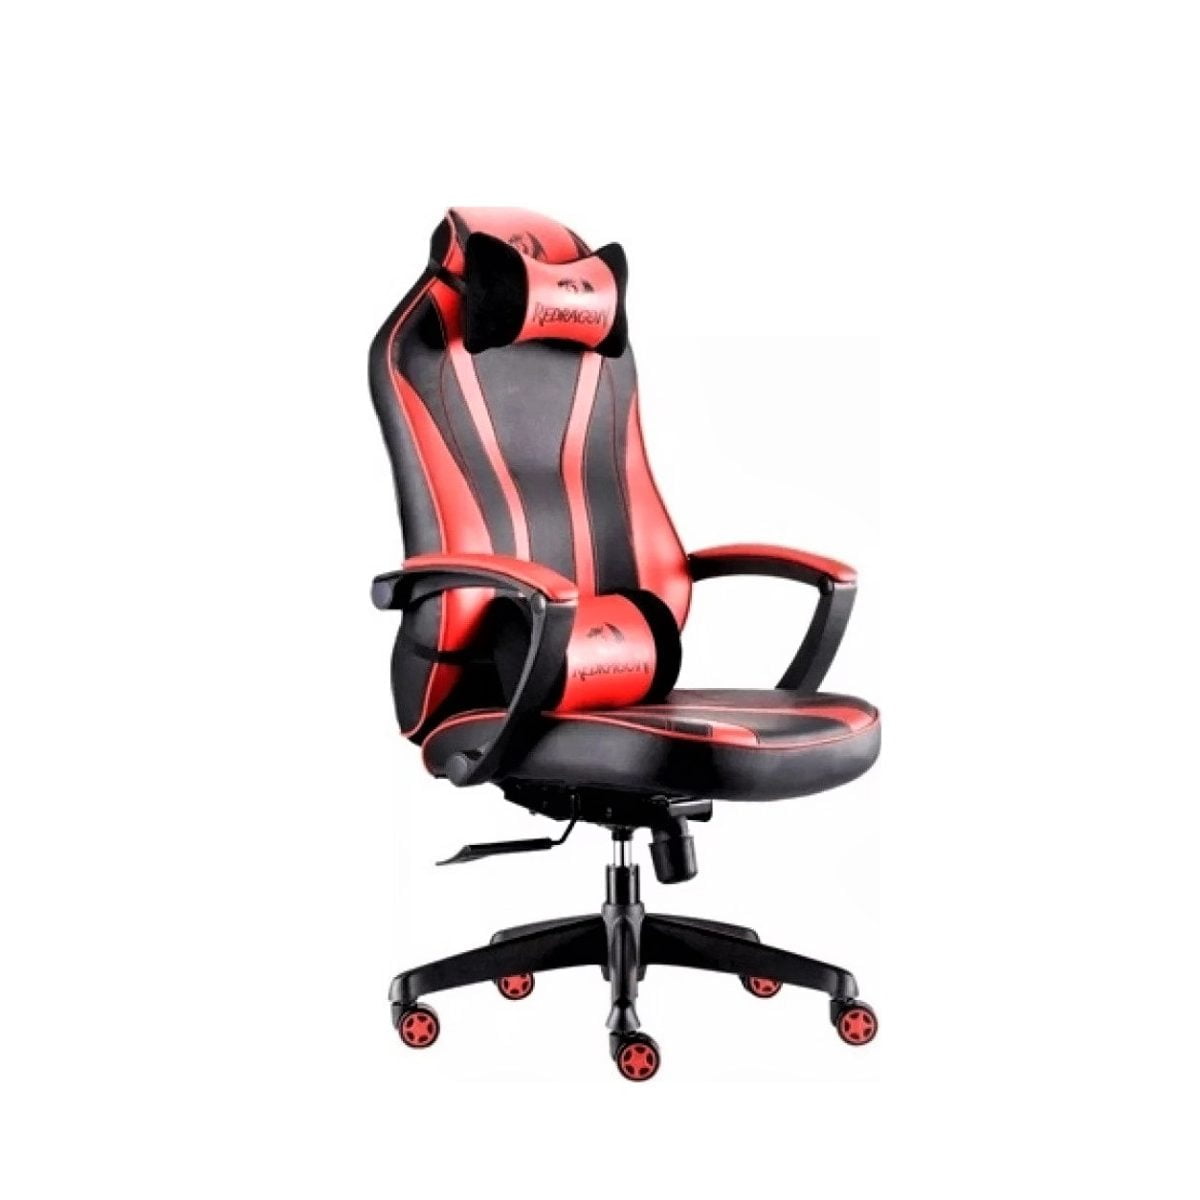 0A4412146Cc327E231E1A0Ecee77211F Hi Redragon &Lt;H1 Class=&Quot;Product-Title-H1&Quot;&Gt;Redragon Metis Gaming Chair C102 Black Red&Lt;/H1&Gt; &Lt;Strong&Gt;Specifications:&Lt;/Strong&Gt; Ergonomic Computer Chair Provide Extra Comfortable, Kinsal Upgarded Size Of Seat 360 Degree Swivel, 90 To 180 Degree Backwards Movement 140 Degree Of Lying Down Angle Gaming Chair Redragon Gaming Chair C102 Black Red